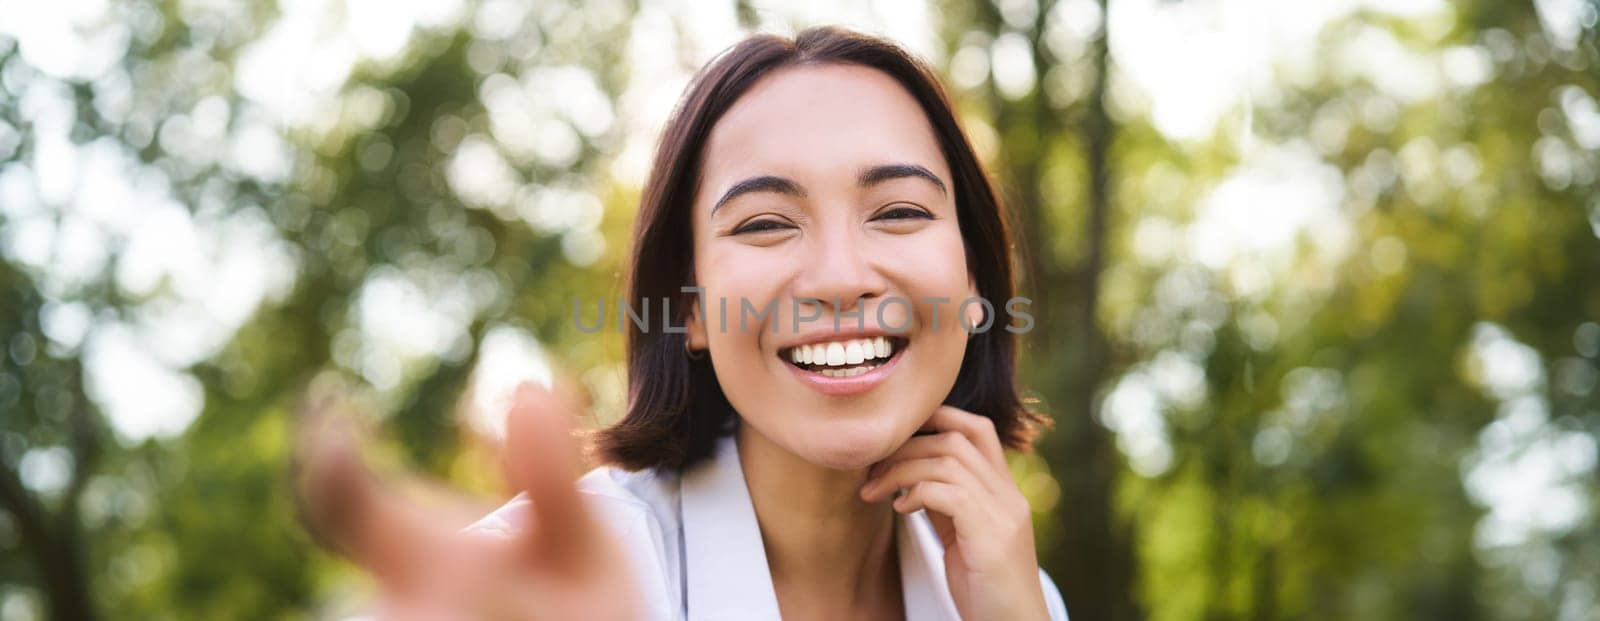 Genuine people. Portrait of asian woman laughing and smiling, walking in park, feeling joy and positivity.